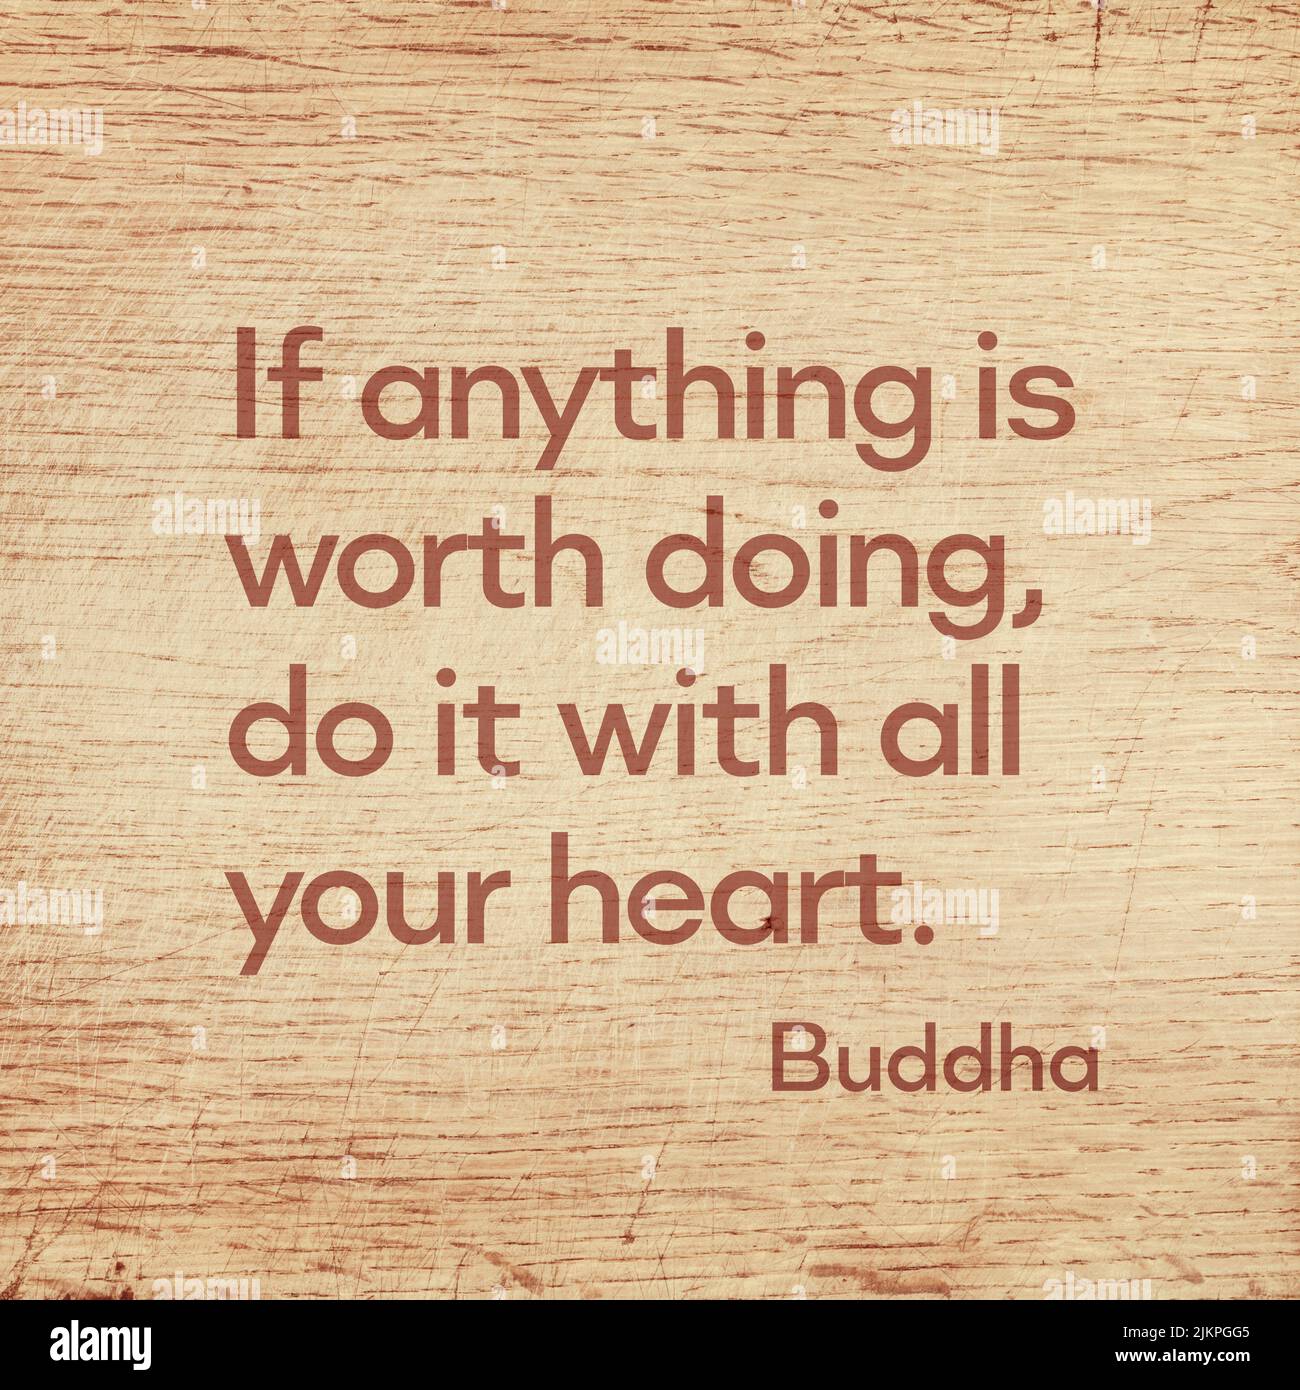 If anything is worth doing, do it with all your heart - famous quote of Gautama Buddha printed on grunge wooden board Stock Photo